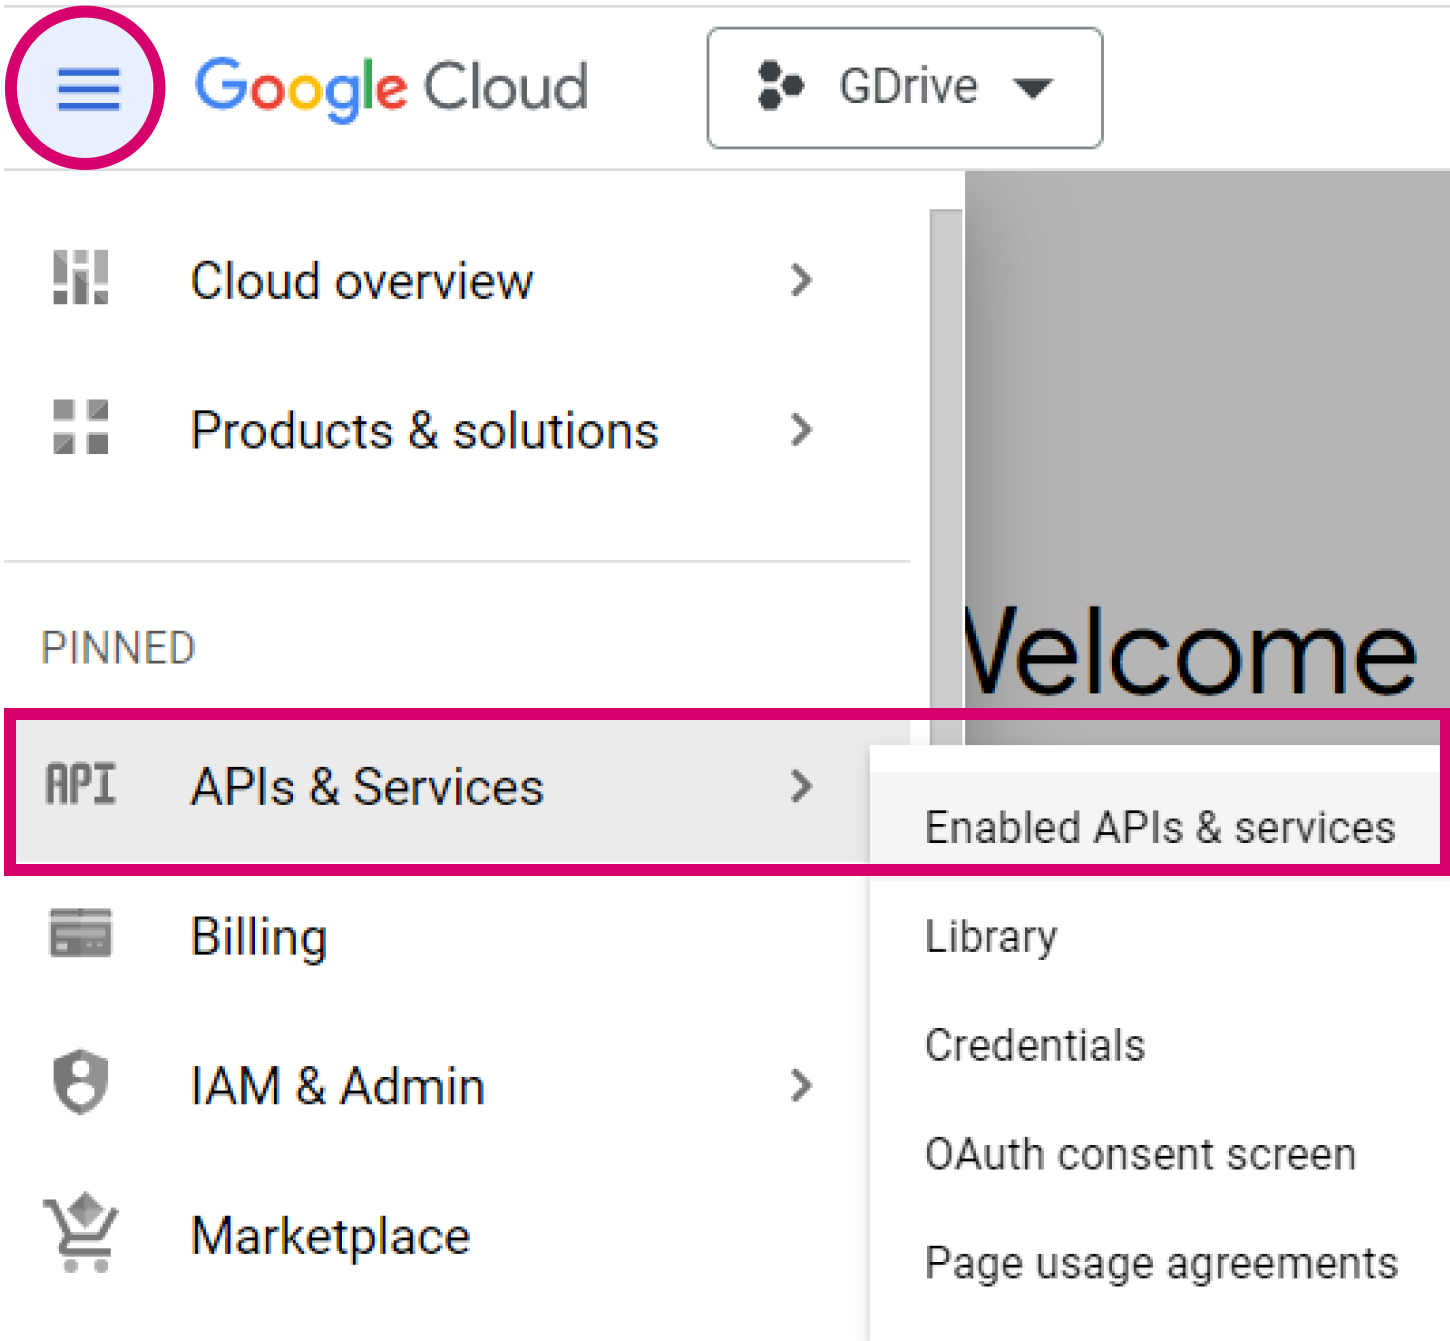 APIs and services